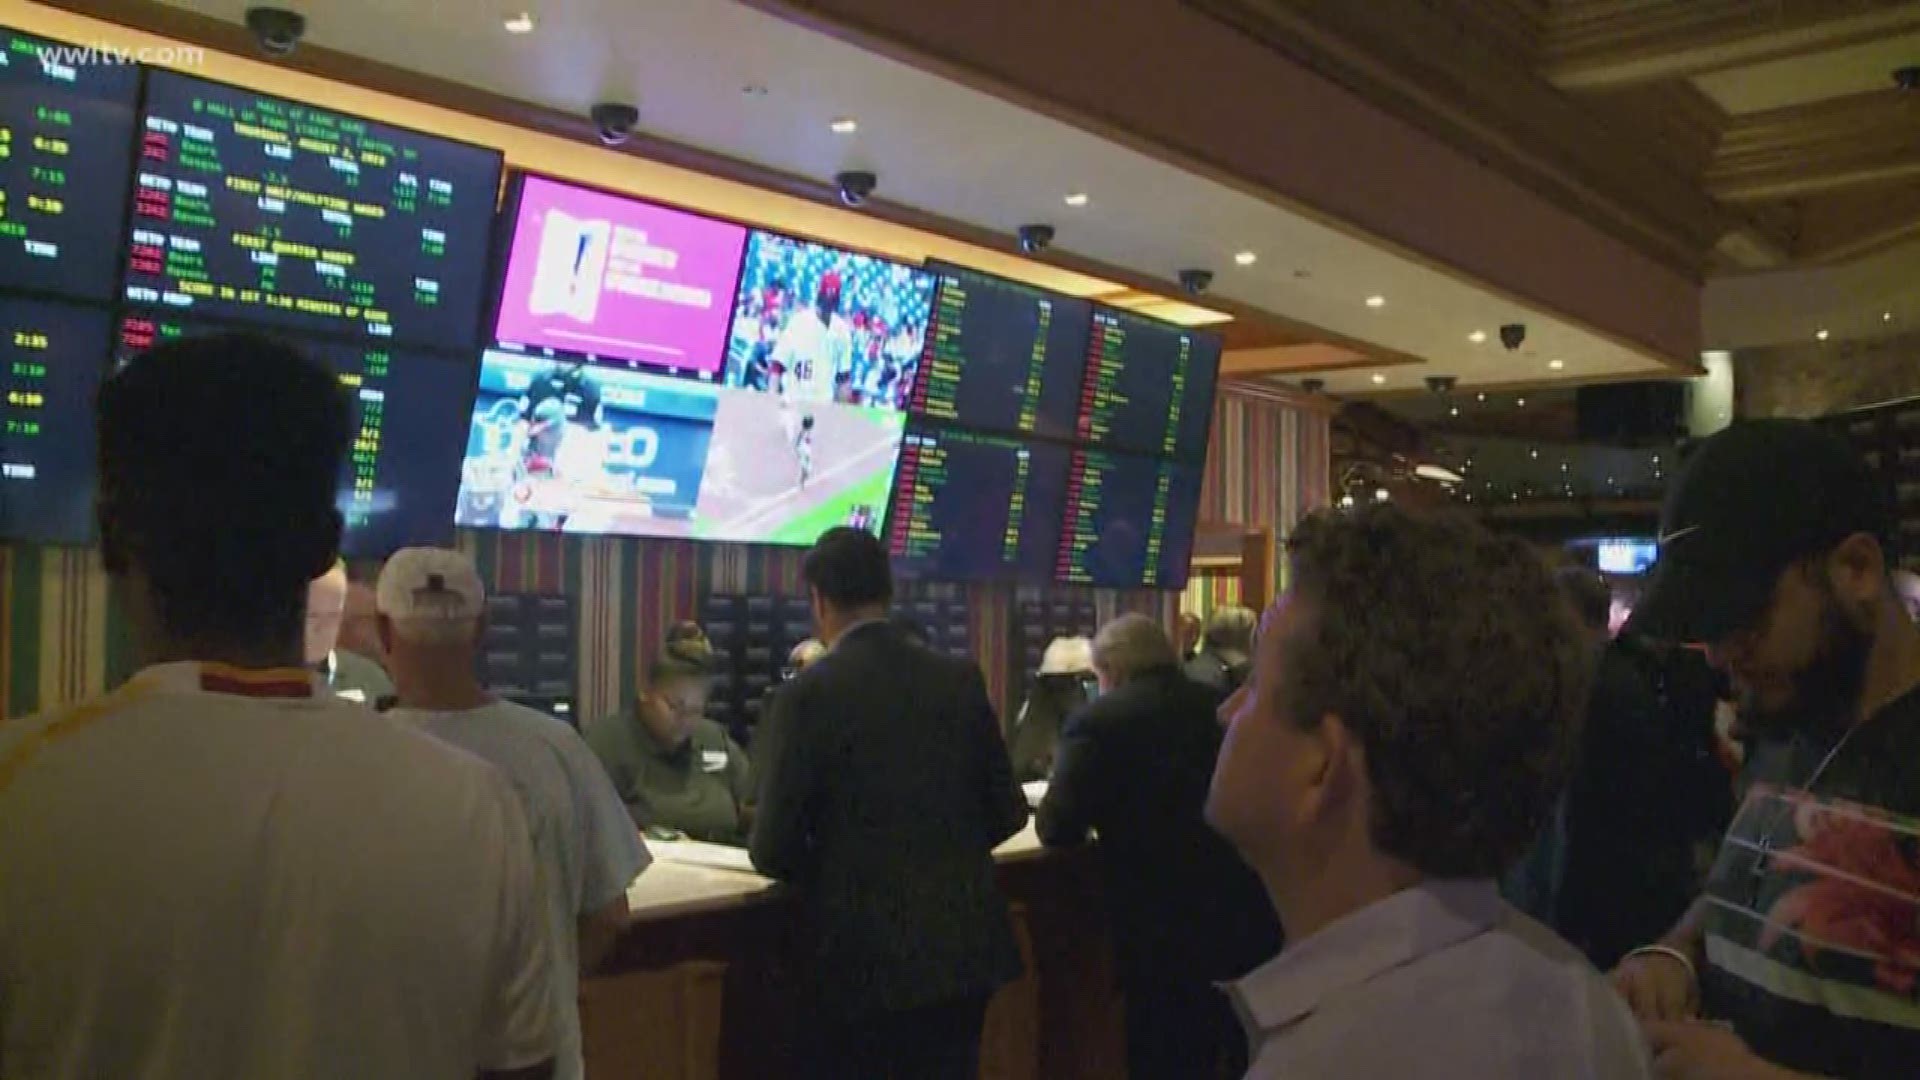 Mississippi is the third state in the nation to launch sports betting.